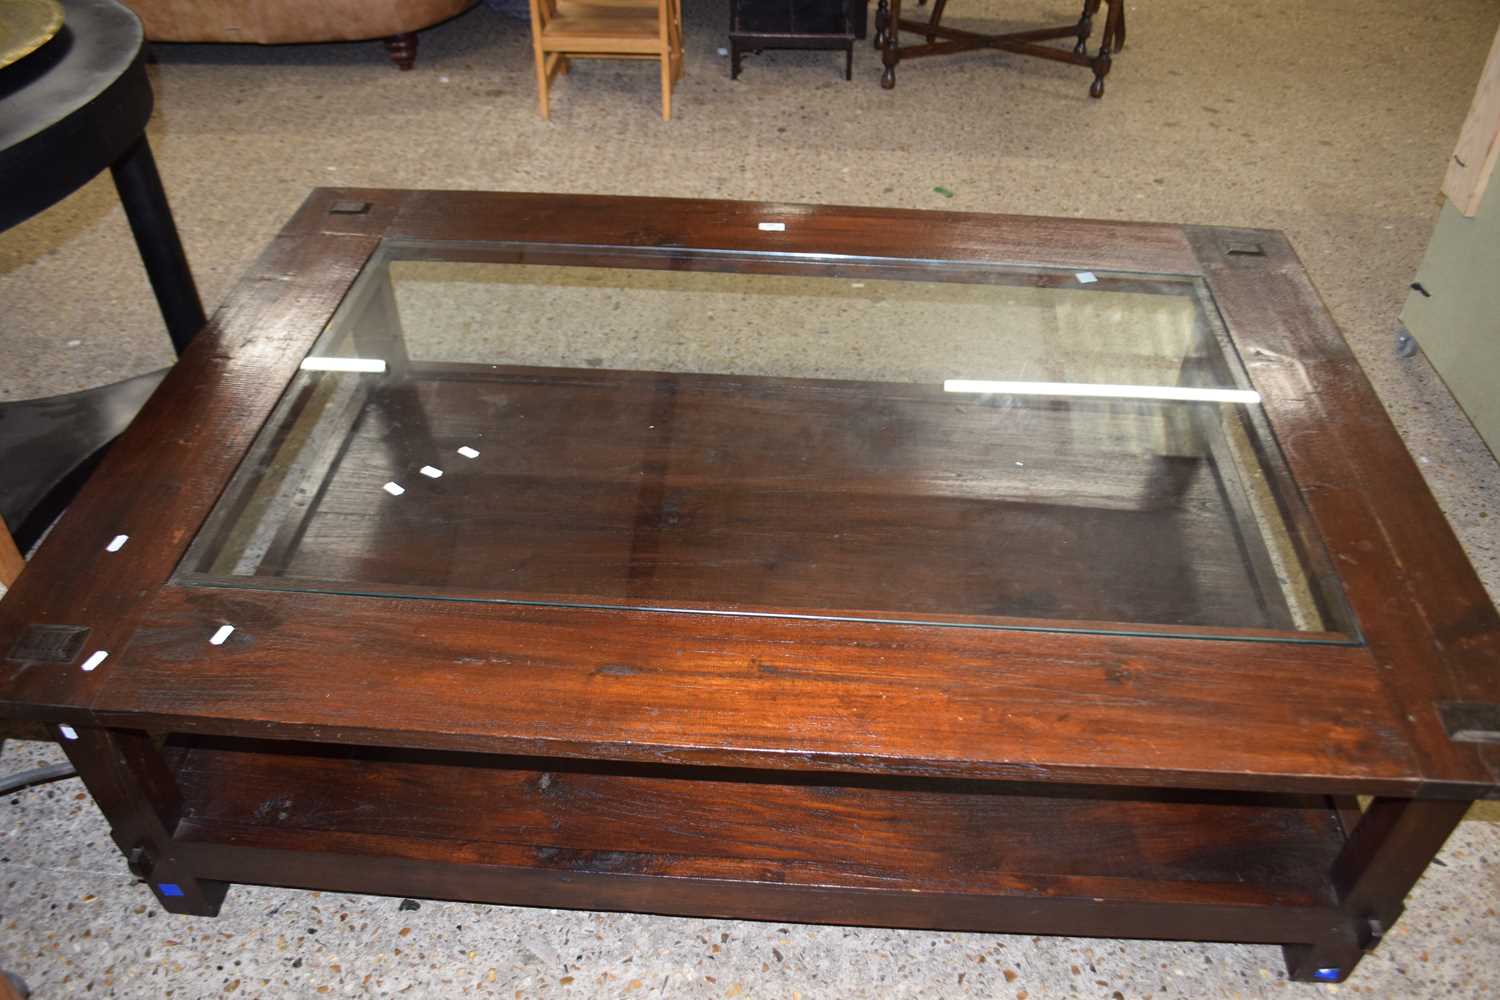 Modern large hardwood rectangular coffee table with glass inset top and shelf beneath